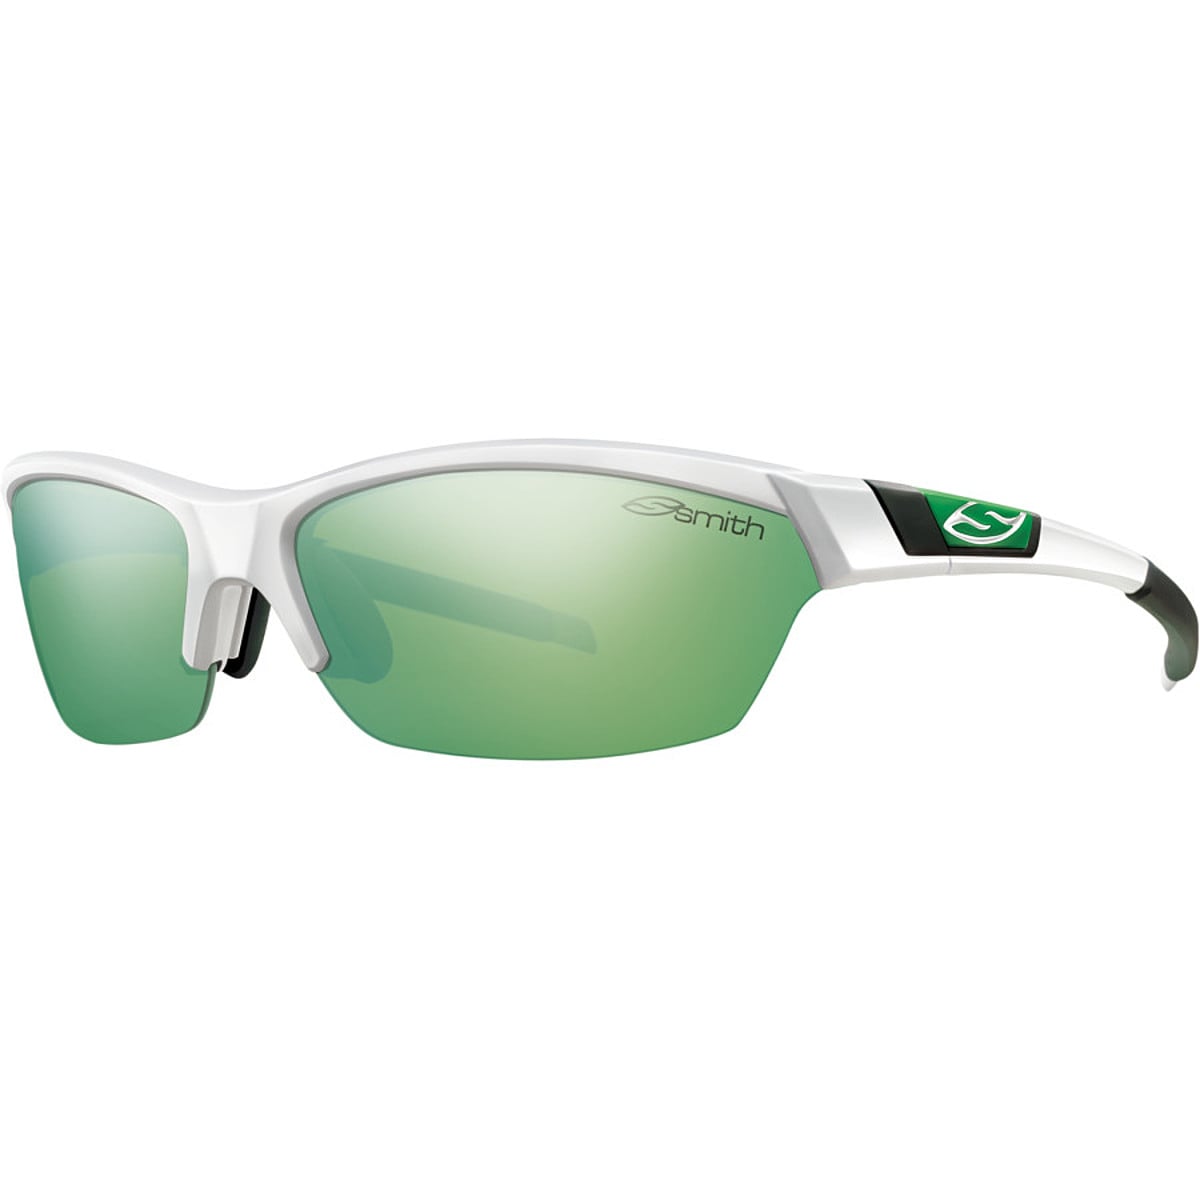 Smith Approach Sunglasses Mens